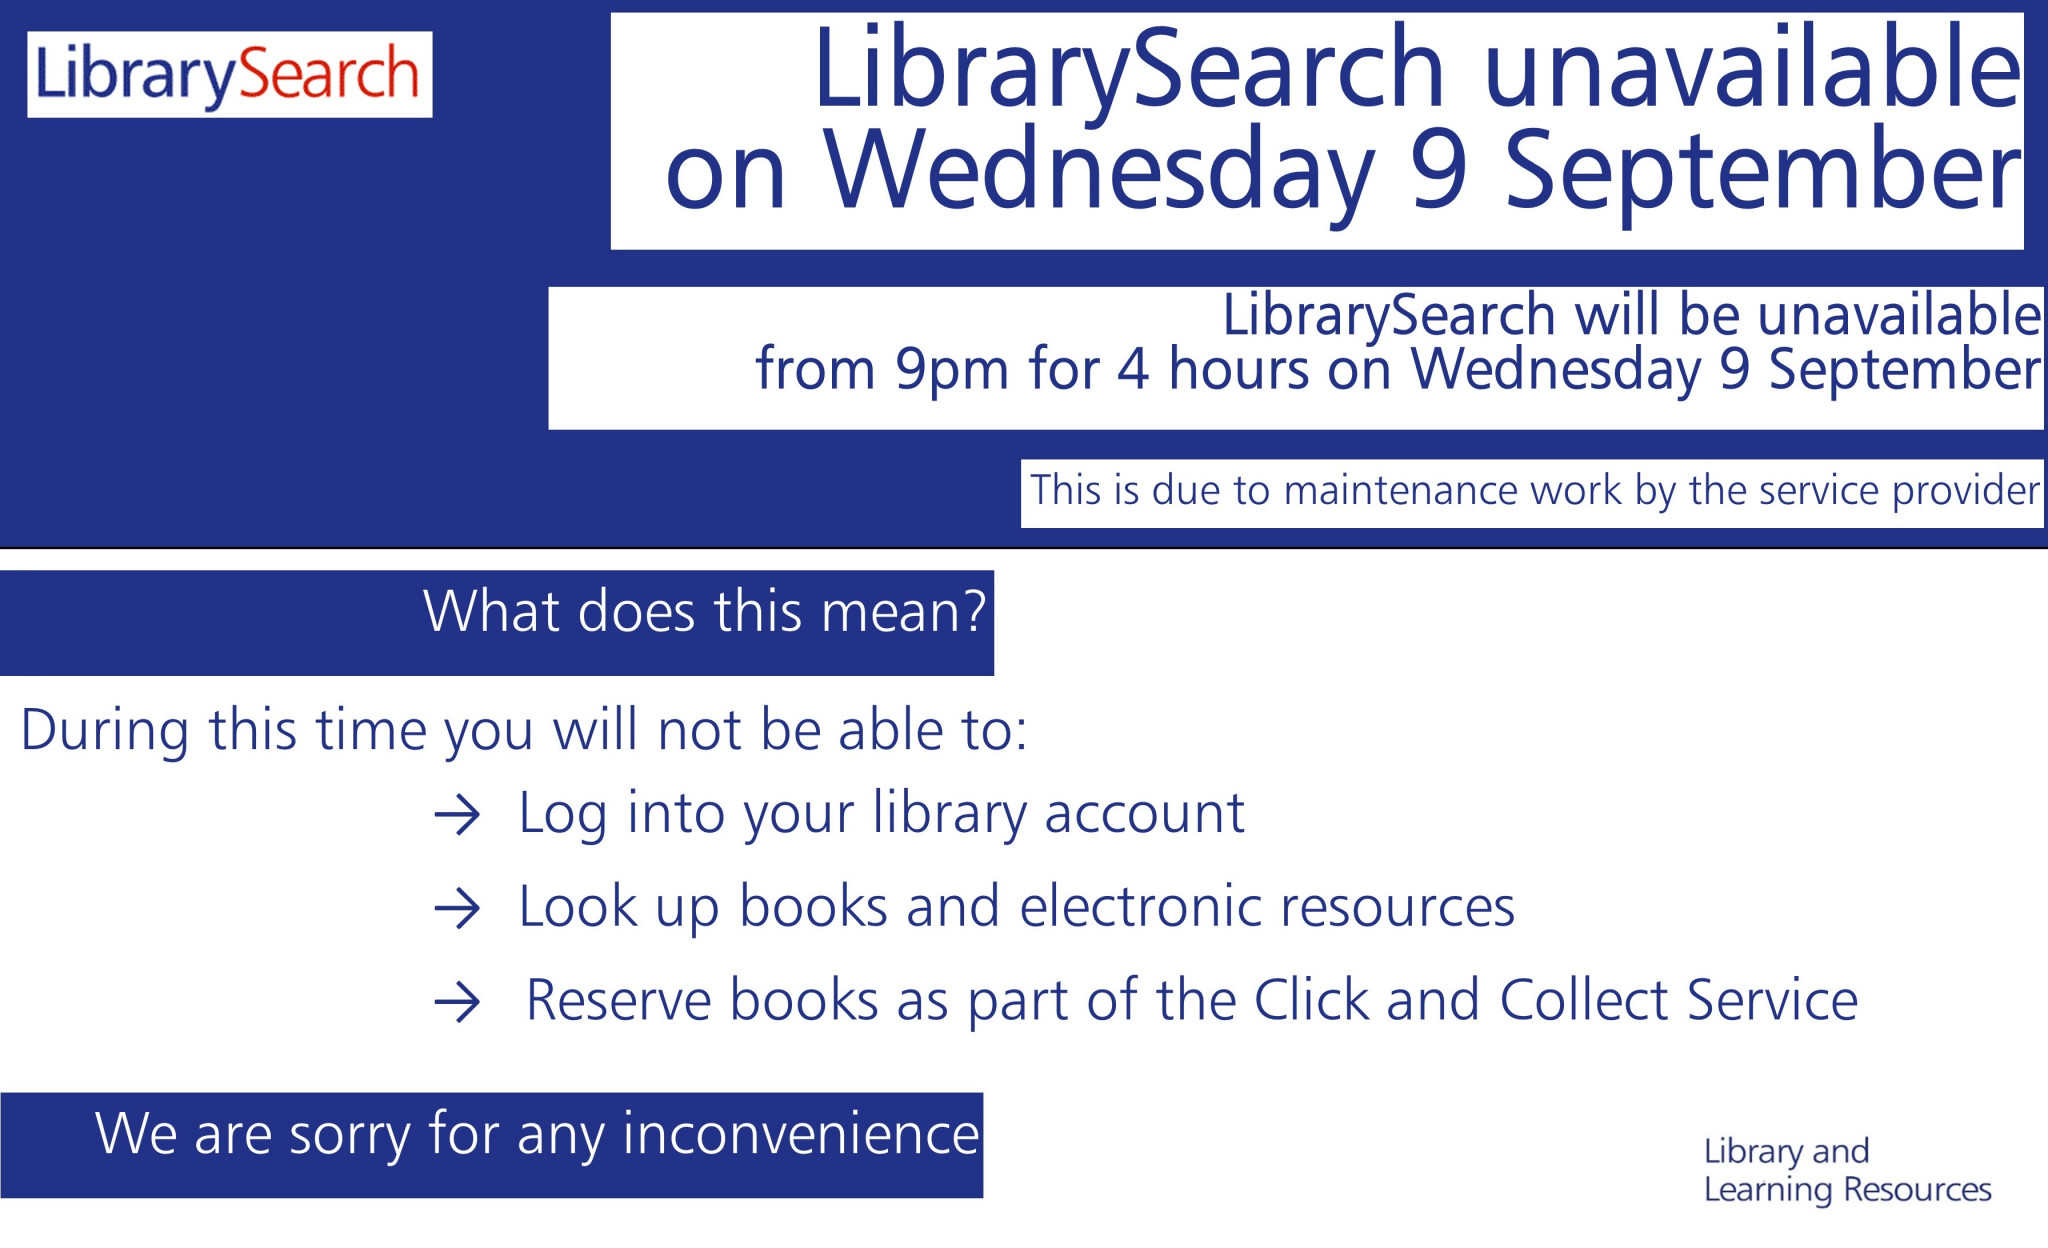 LibrarySearch unavailable on 9 September from 9pm